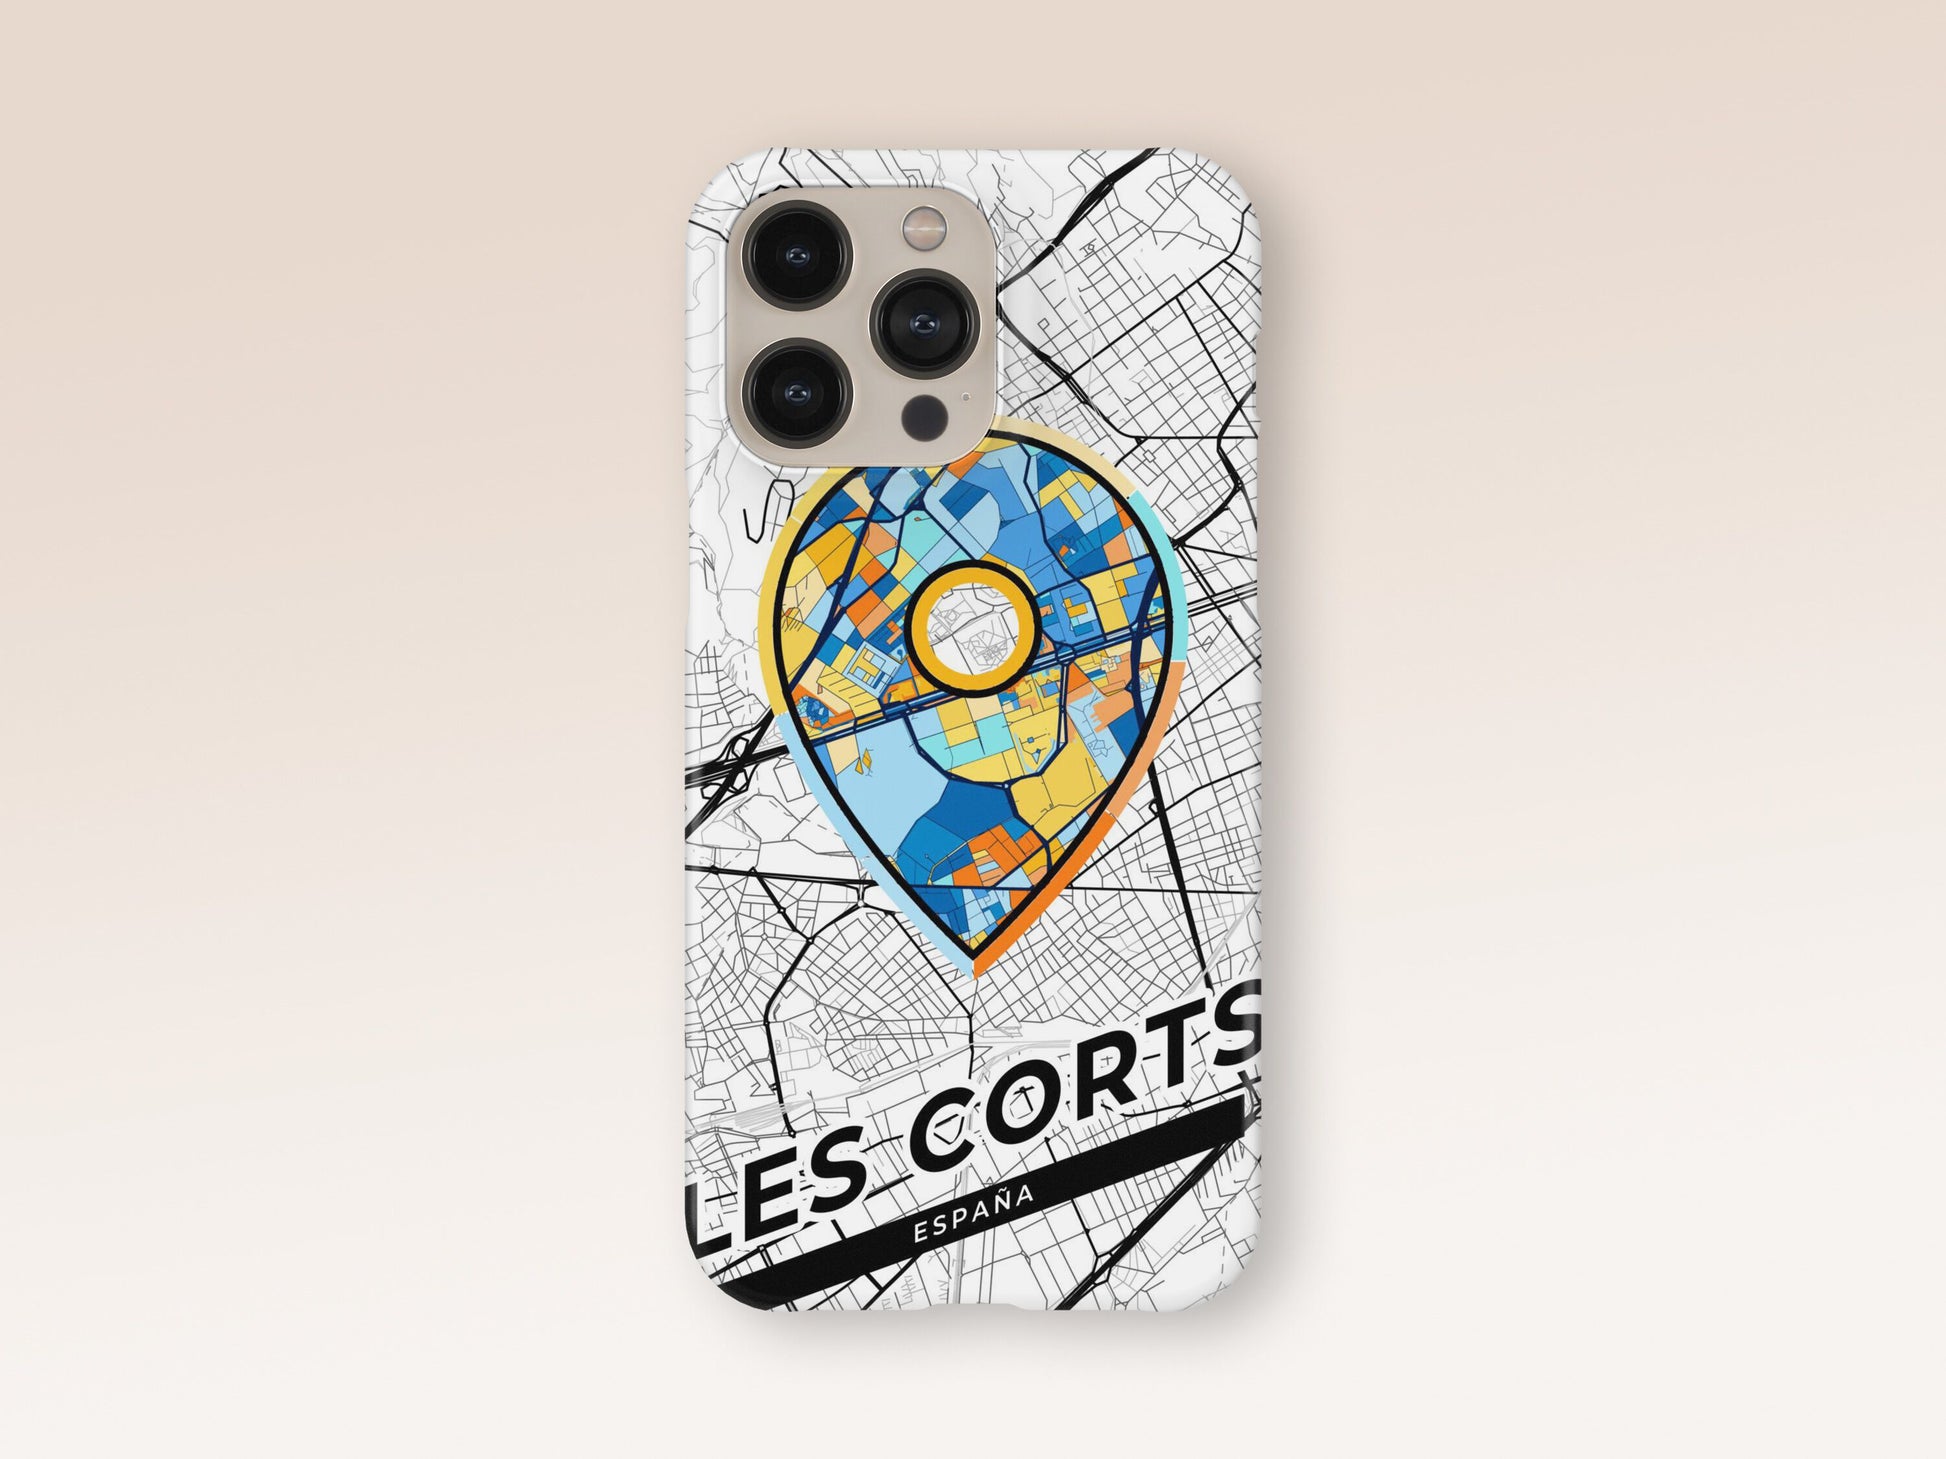 Les Corts Spain slim phone case with colorful icon. Birthday, wedding or housewarming gift. Couple match cases. 1